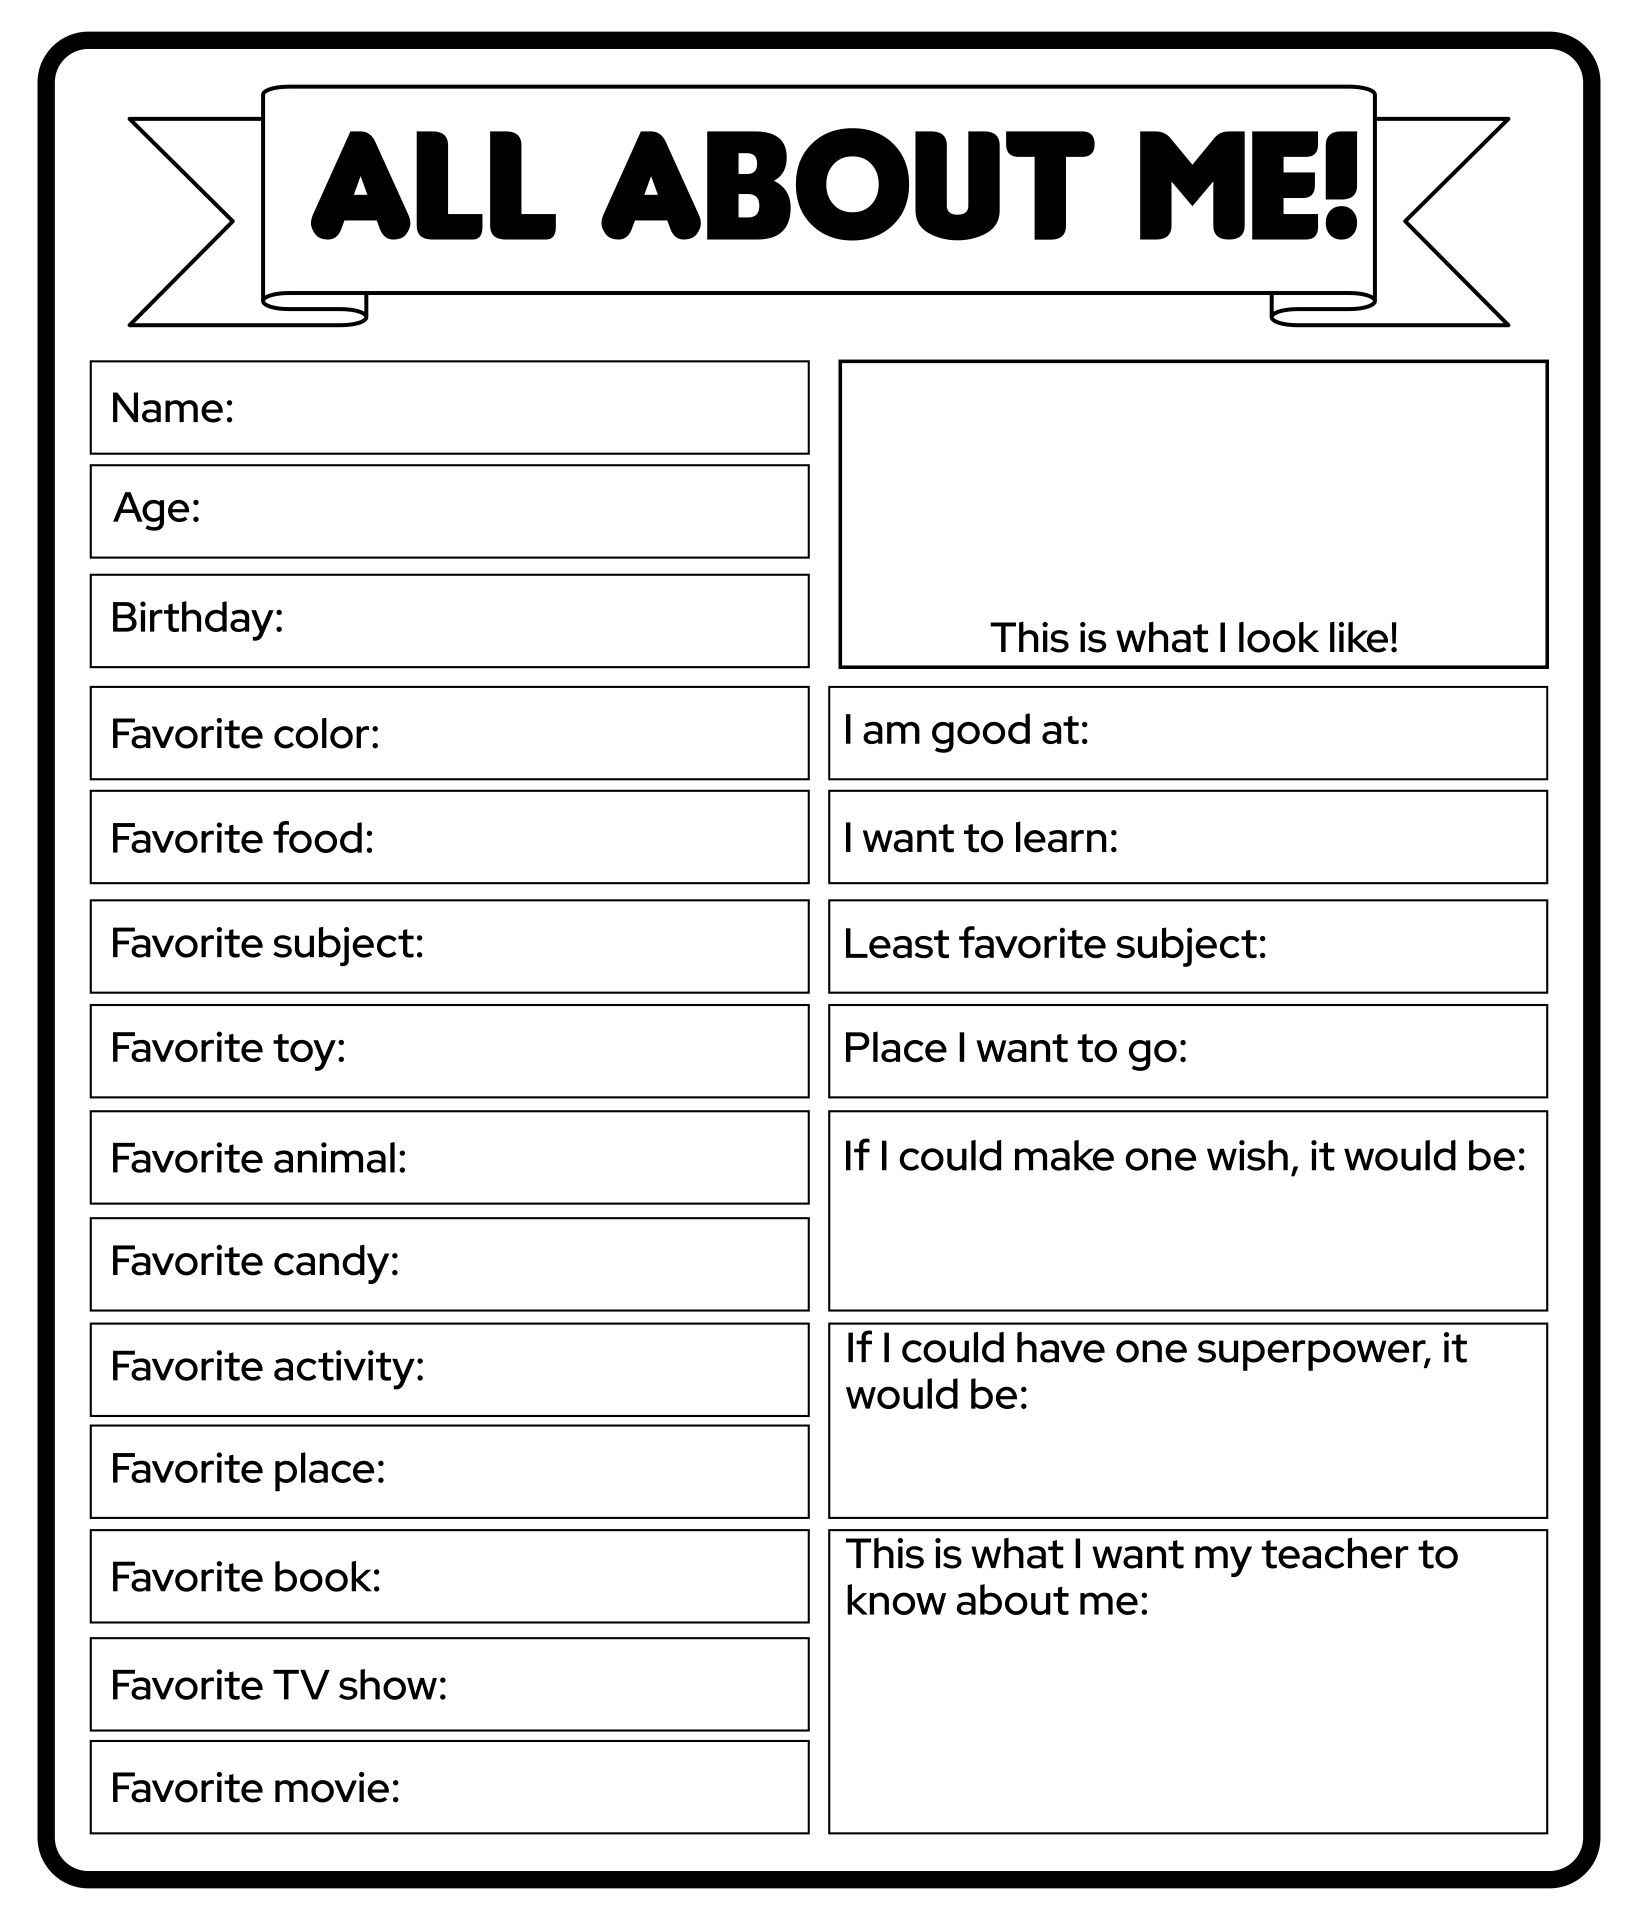 20-best-free-printable-all-about-me-adult-pdf-for-free-at-printablee